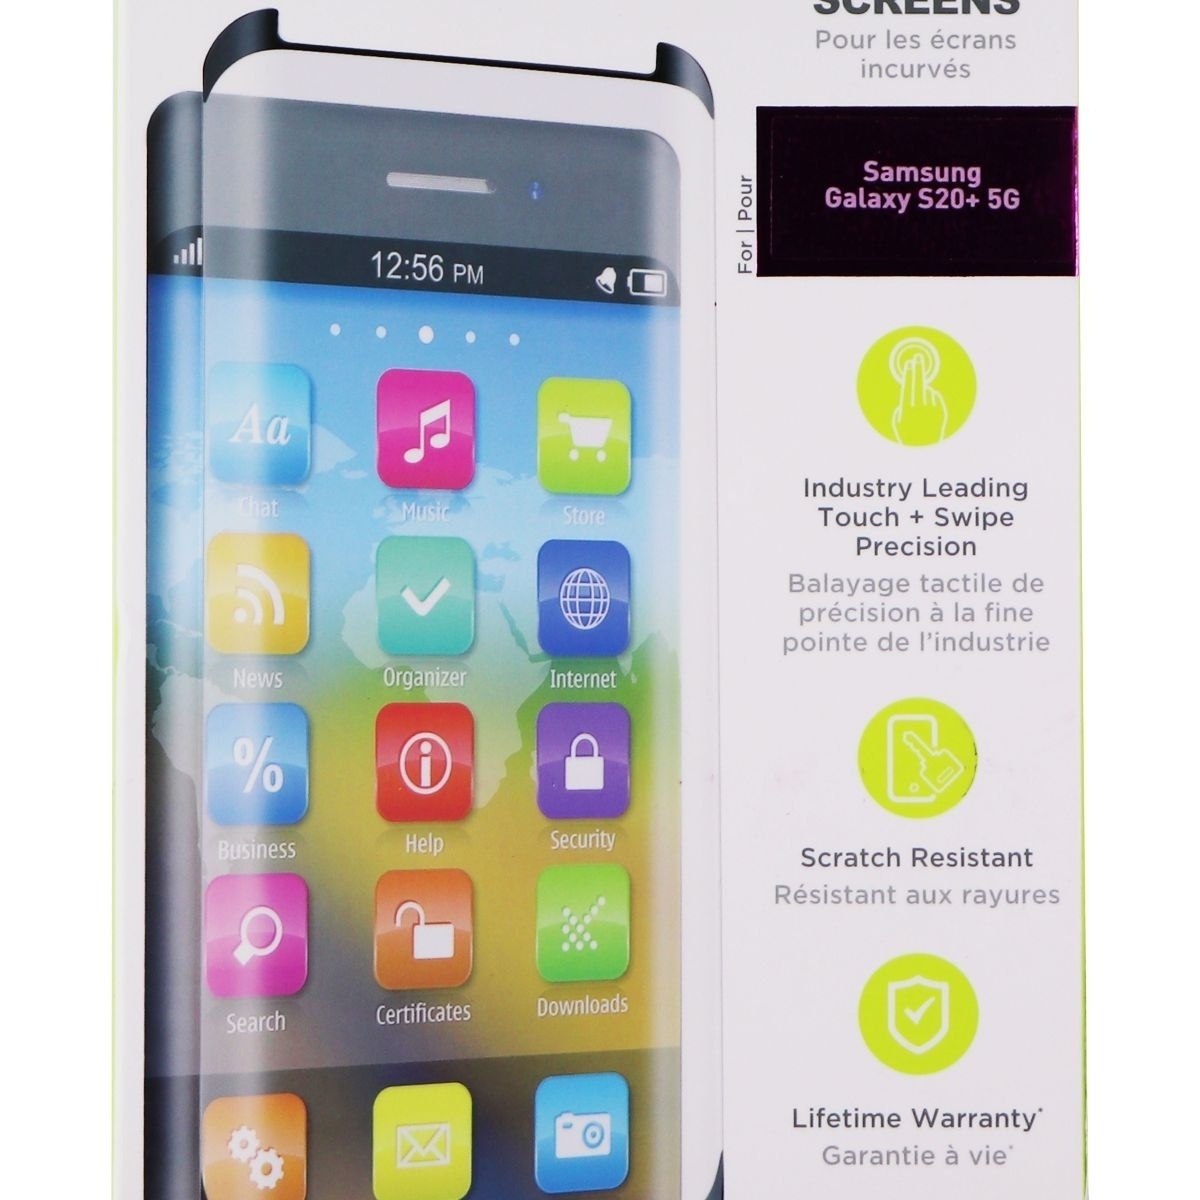 PureGear HD Tempered Glass Screen Protector For Samsung Galaxy S20+ 5G